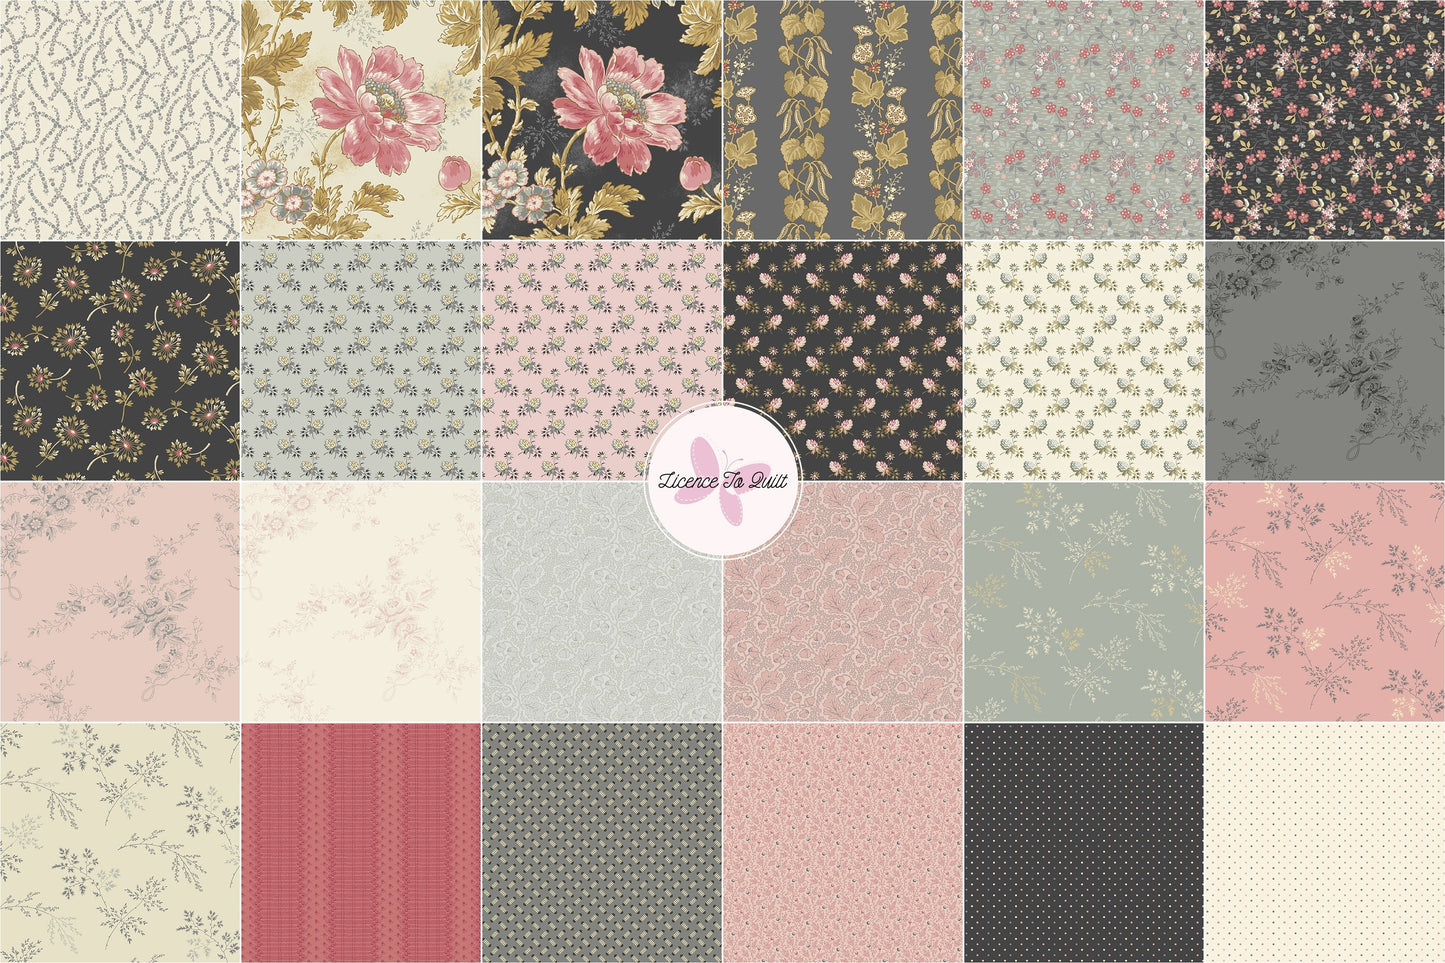 Moonstone - Stormy Clover - Licence To Quilt